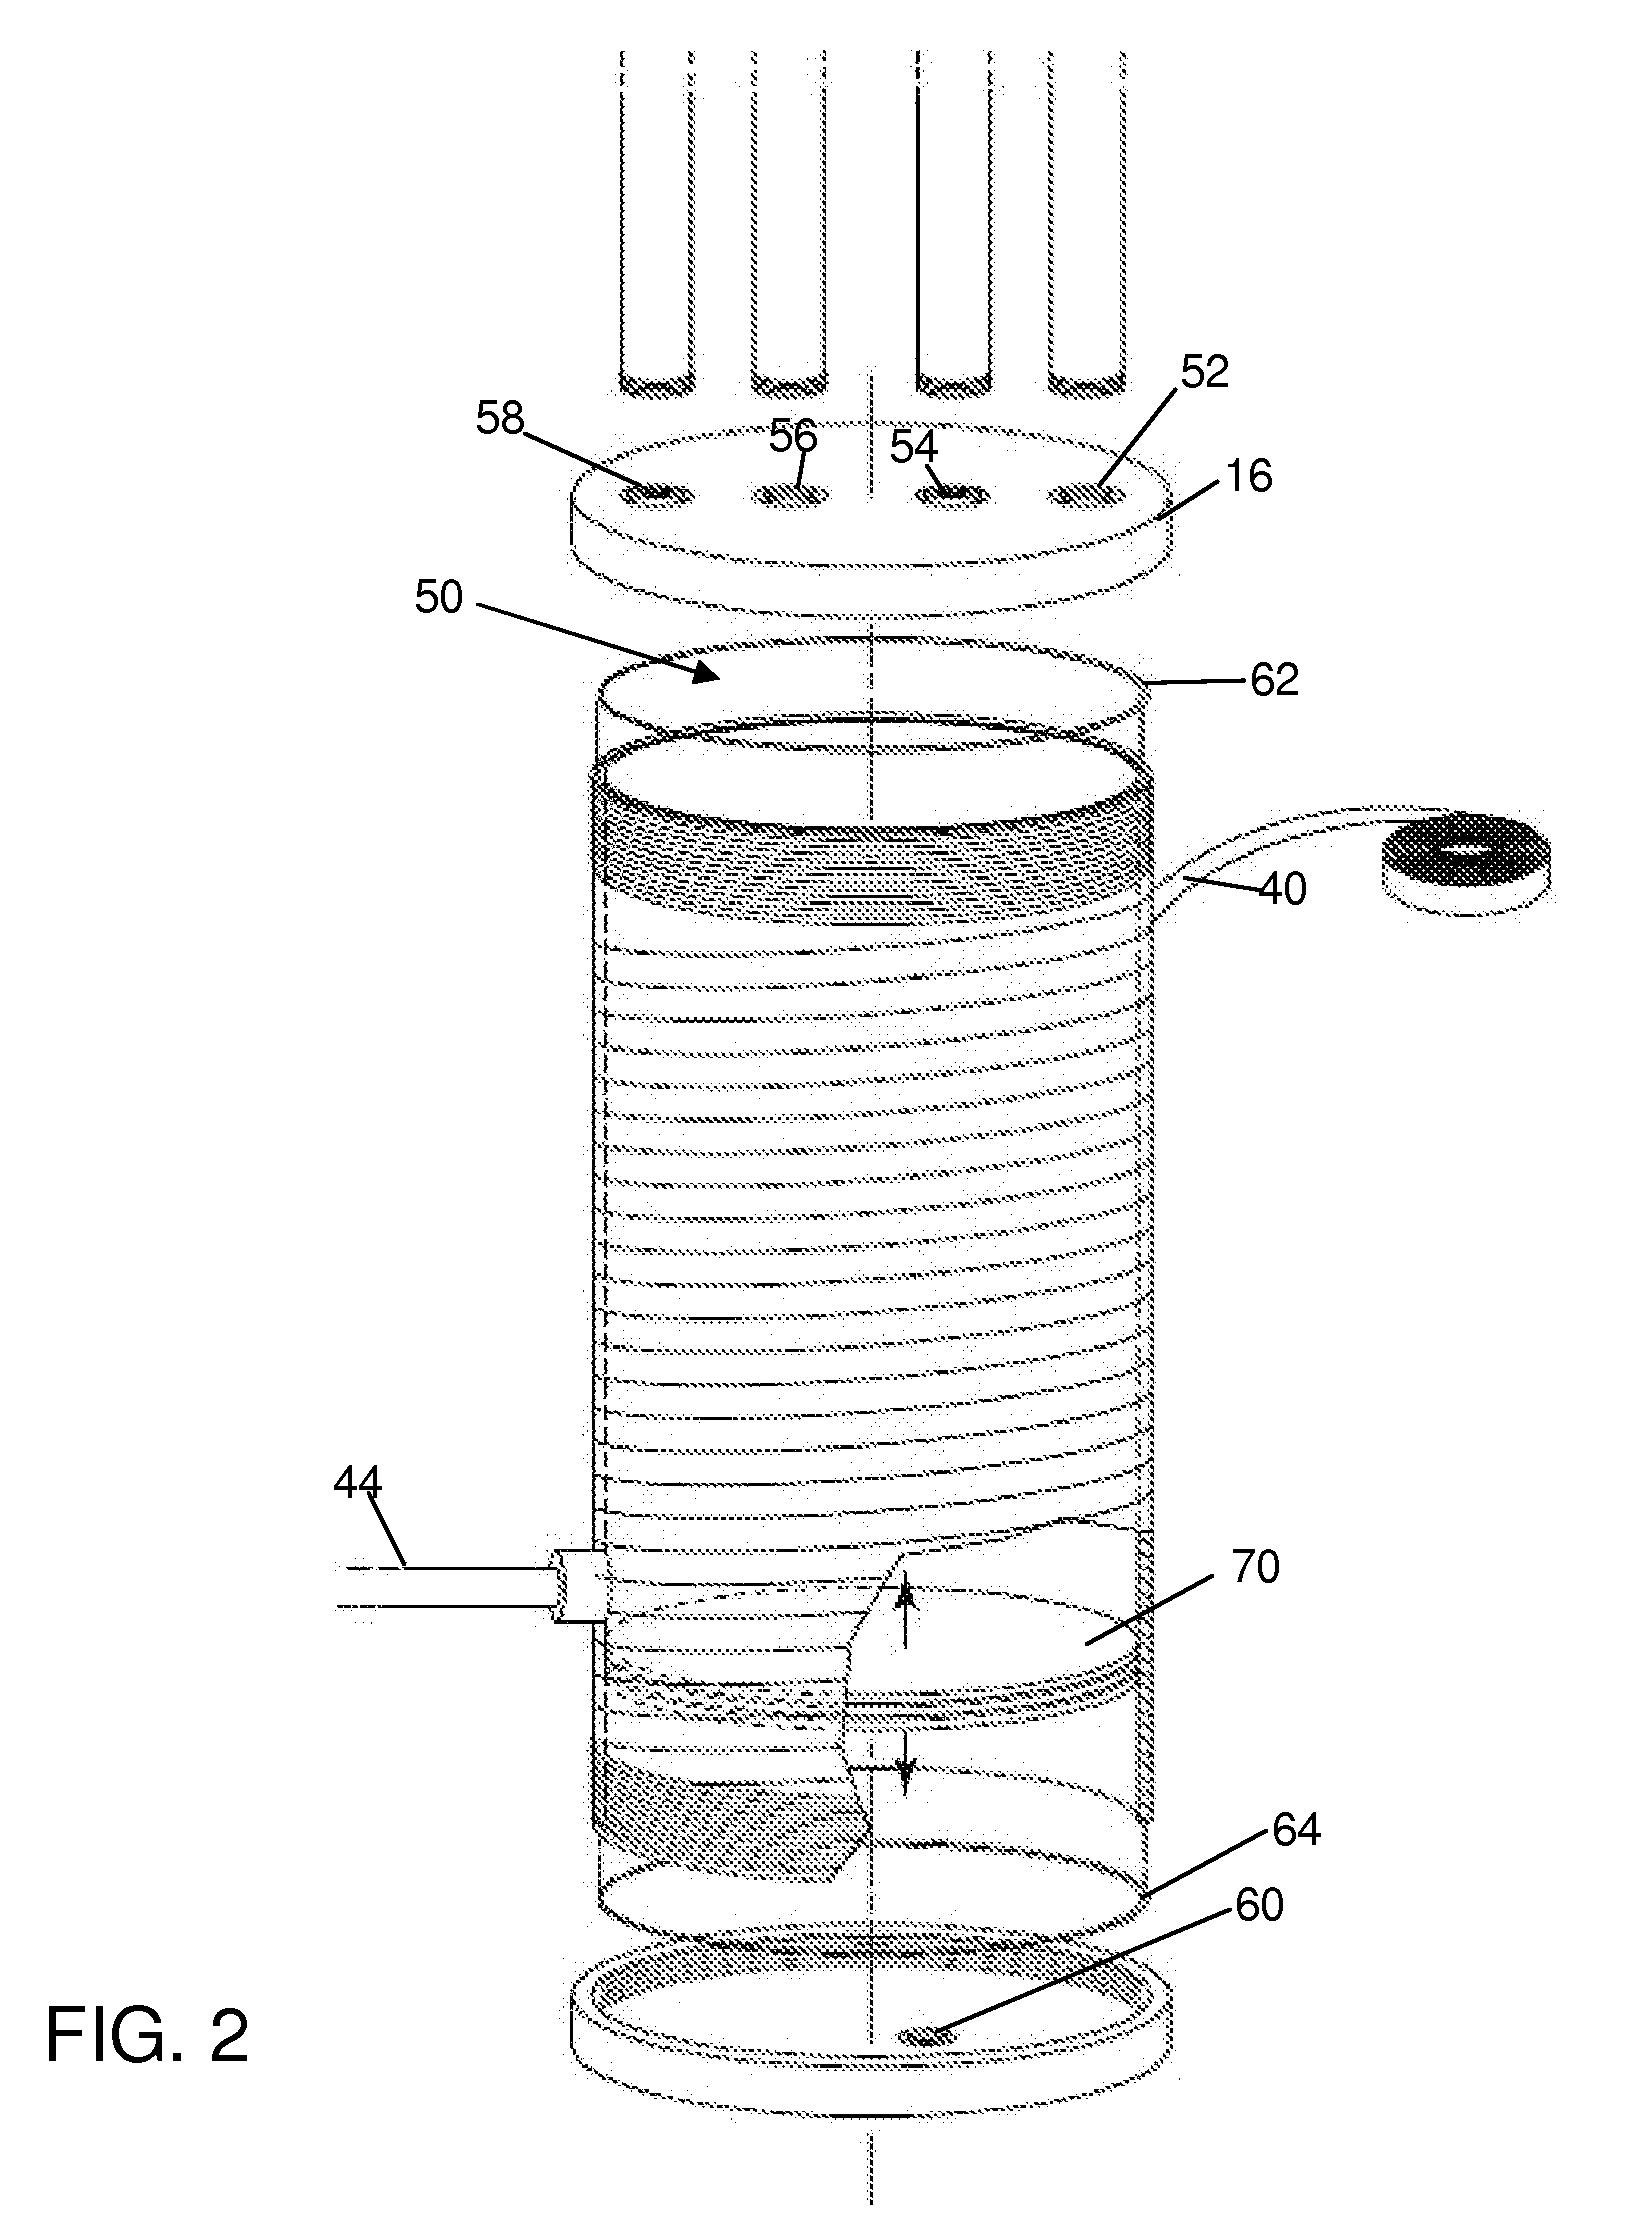 Process for testing a sample of hydraulic fracturing fluid